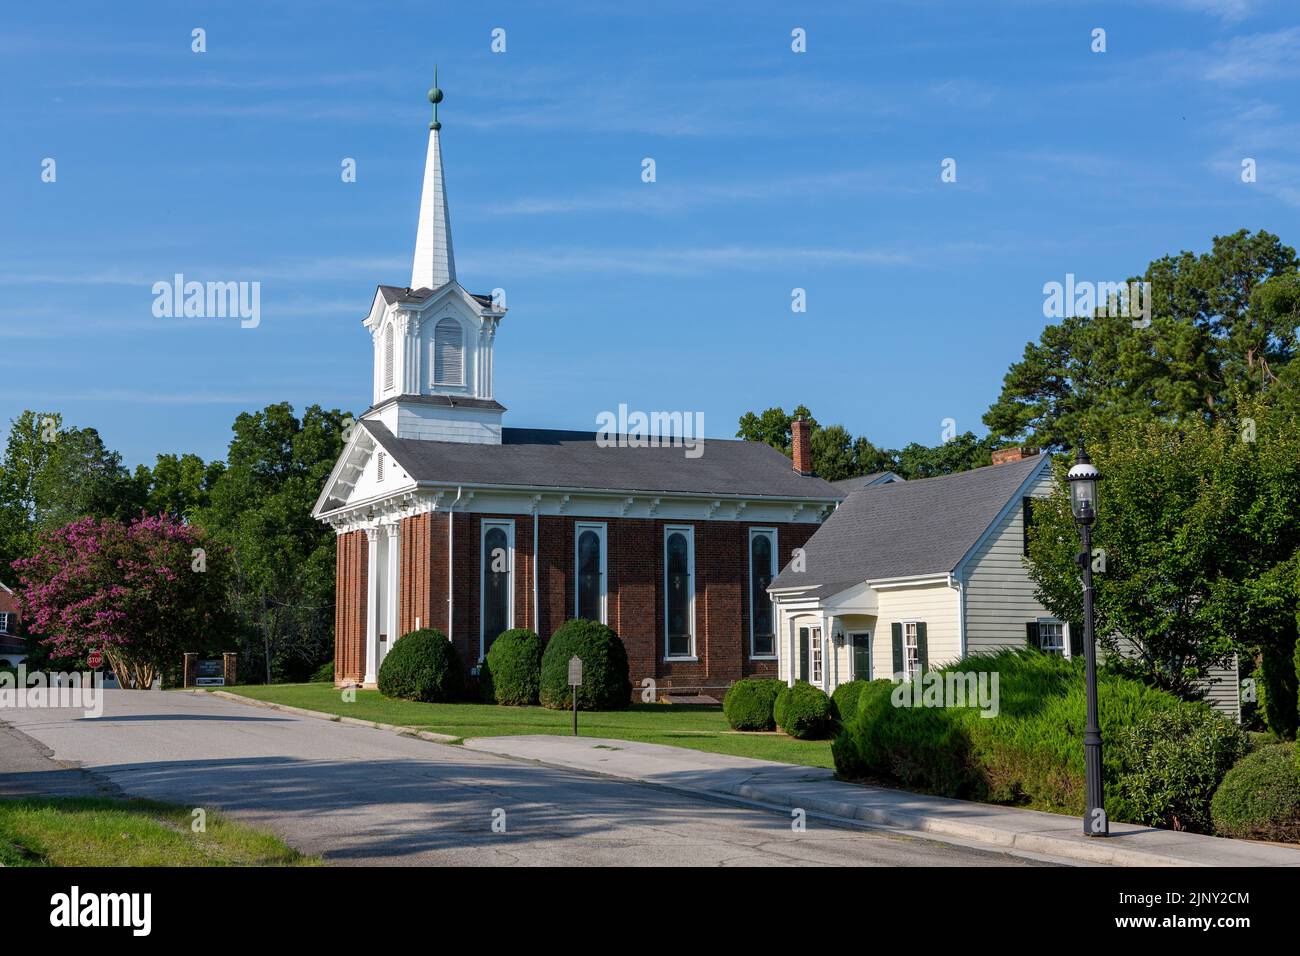 View of the historic town of Boydton in Virginia. Methodist church looking splendid in the hot summer sunshine. Stock Photo